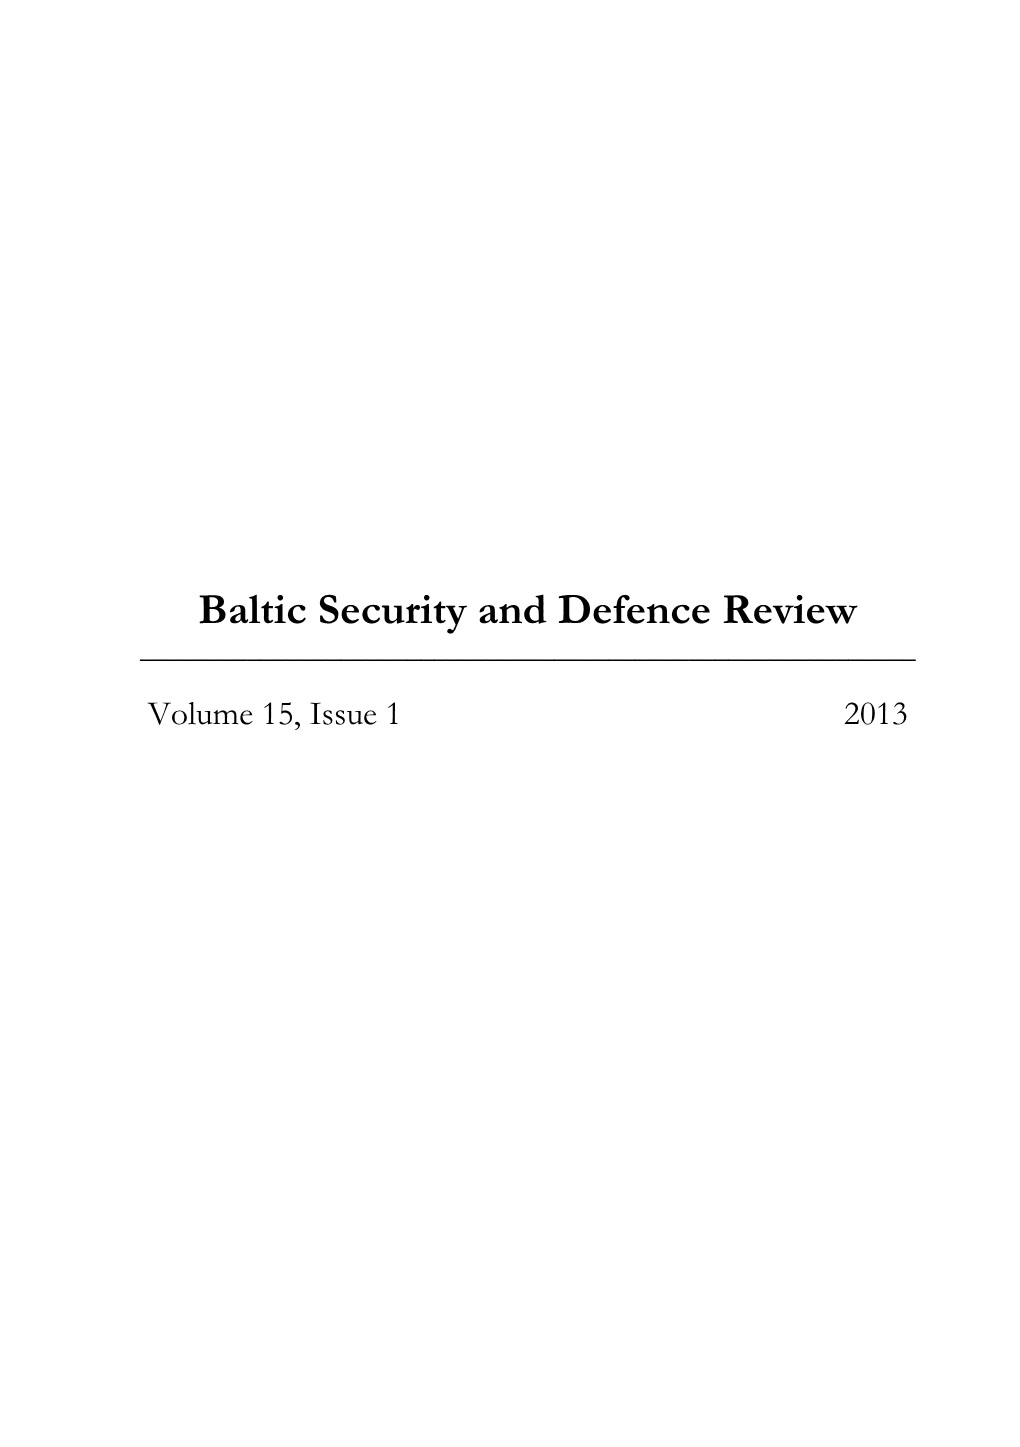 Baltic Security and Defence Review, 2013